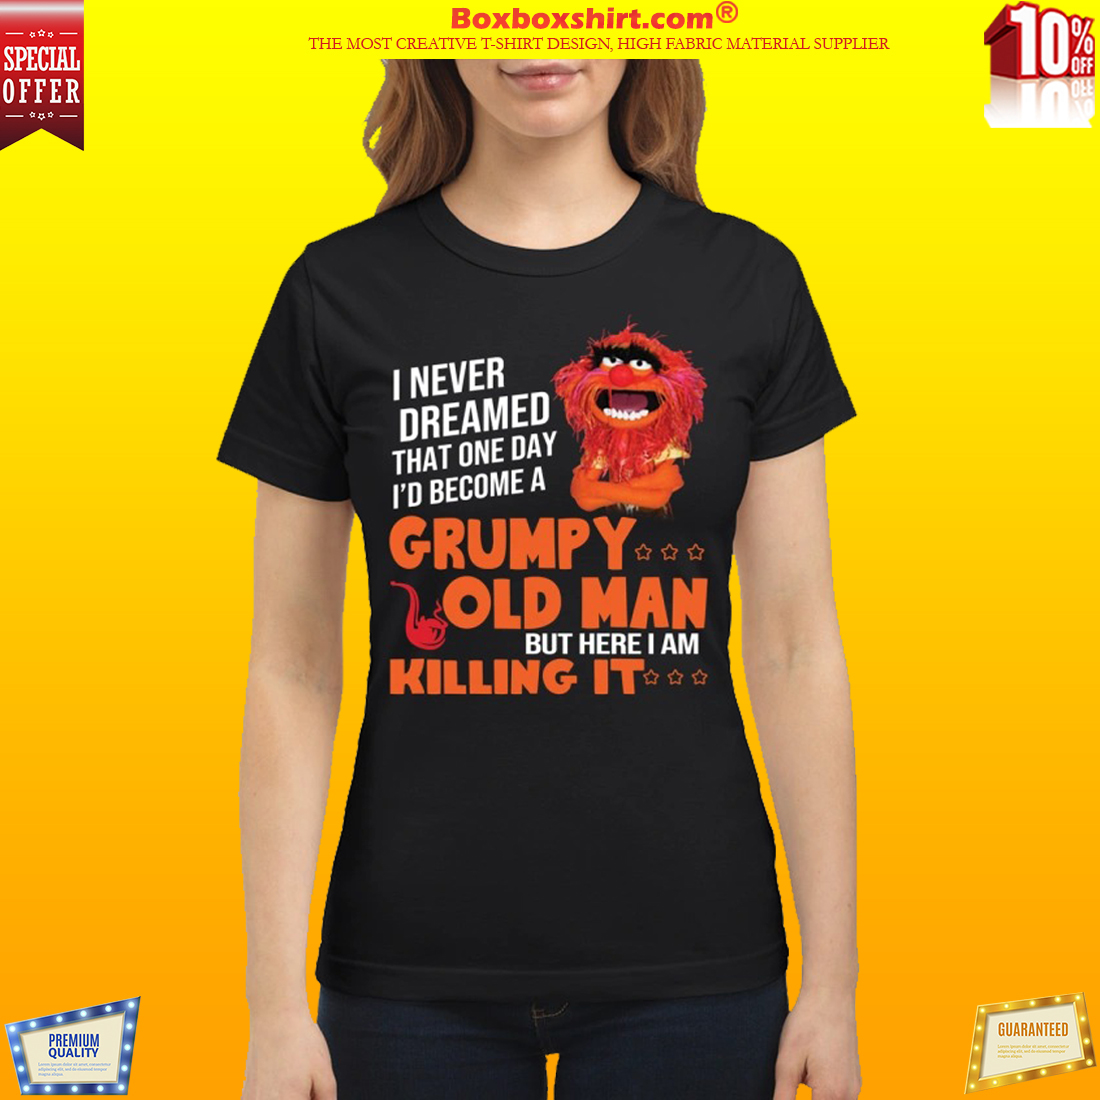 I never dream become Grumpy old man killing it shirt and classic shirt